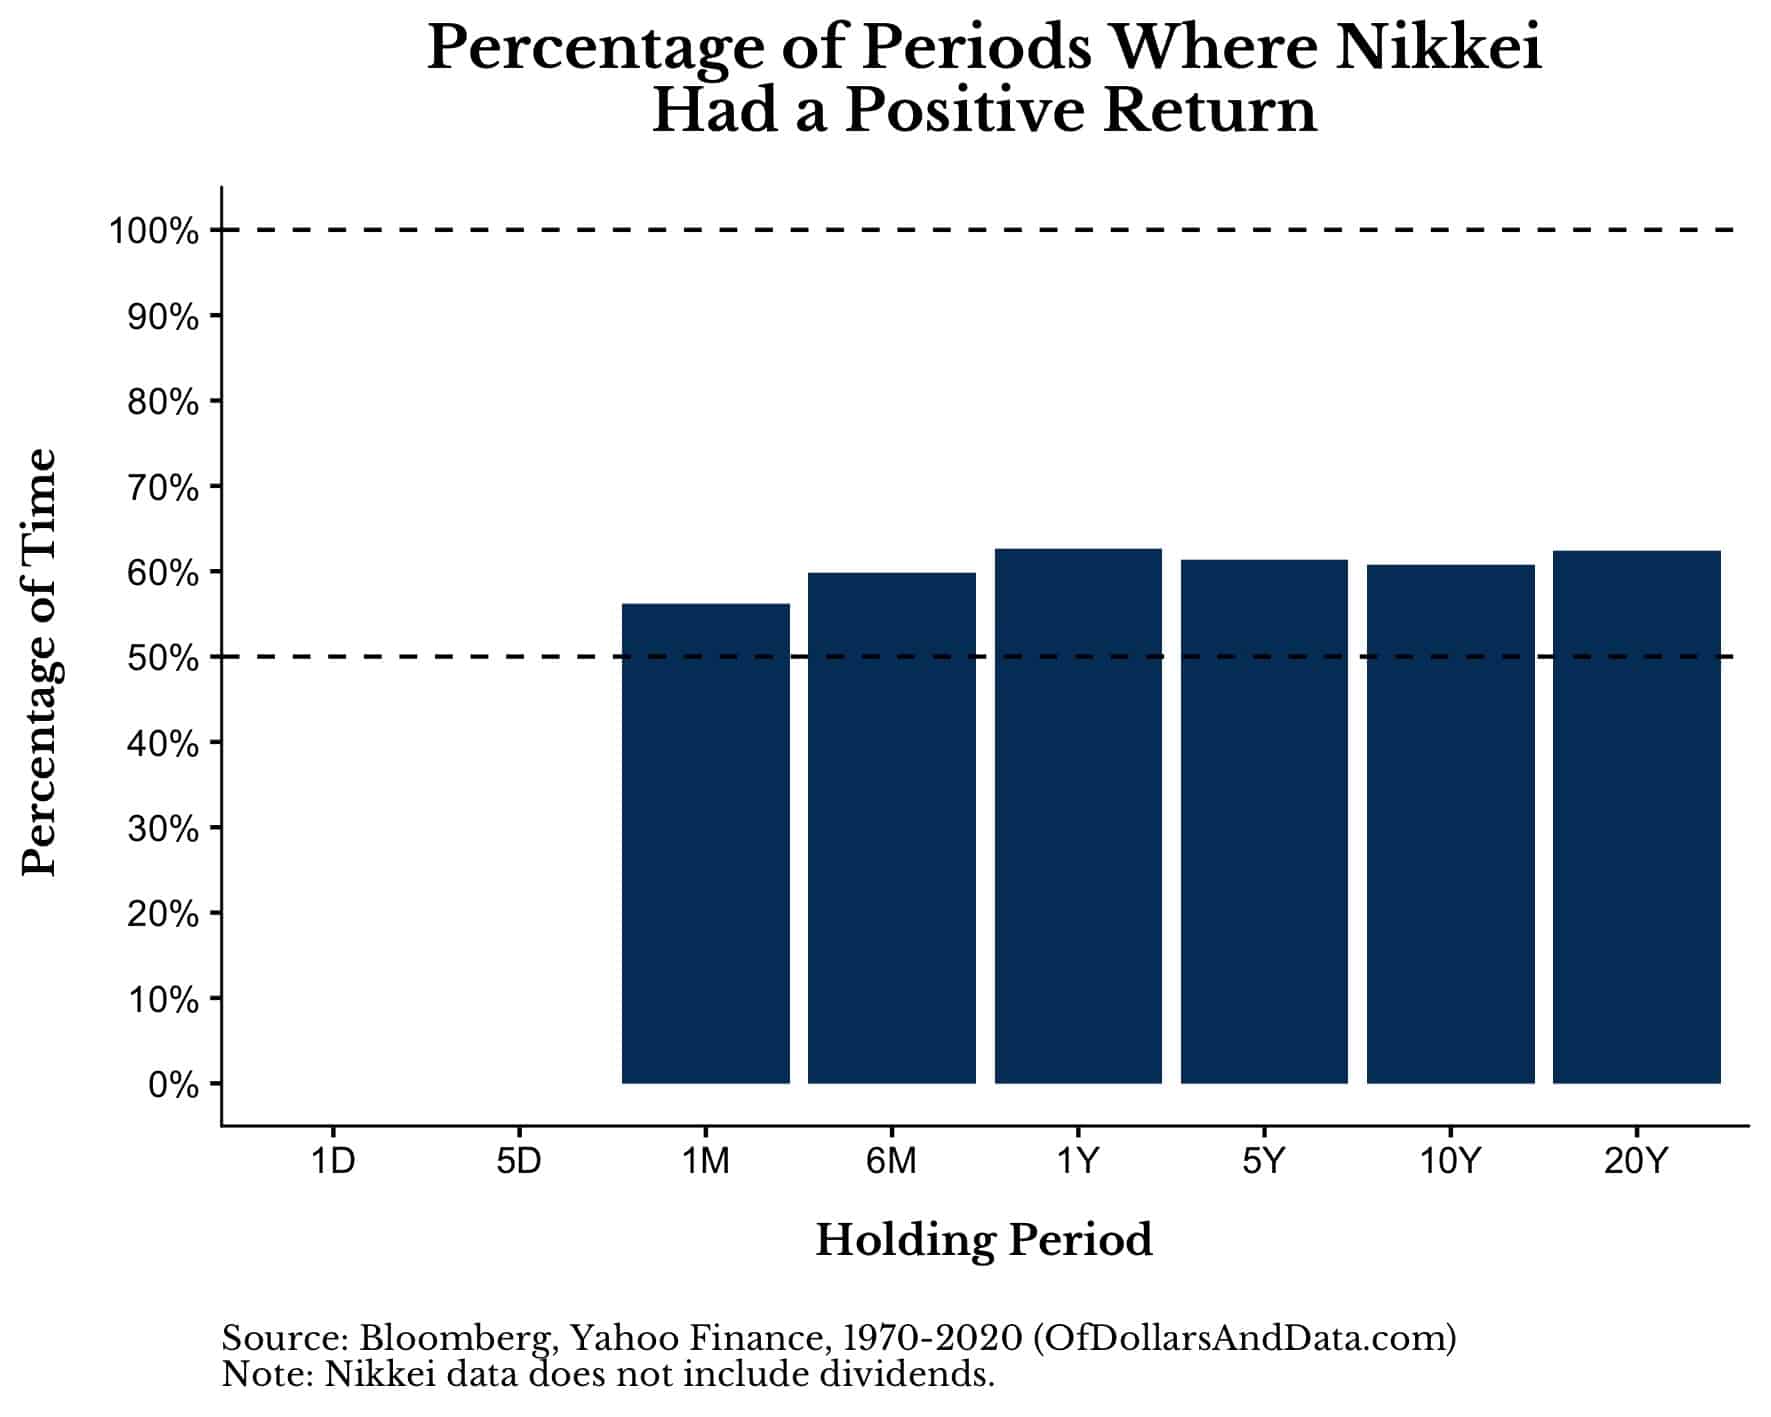 Percentage of periods where Nikkie had a positive return